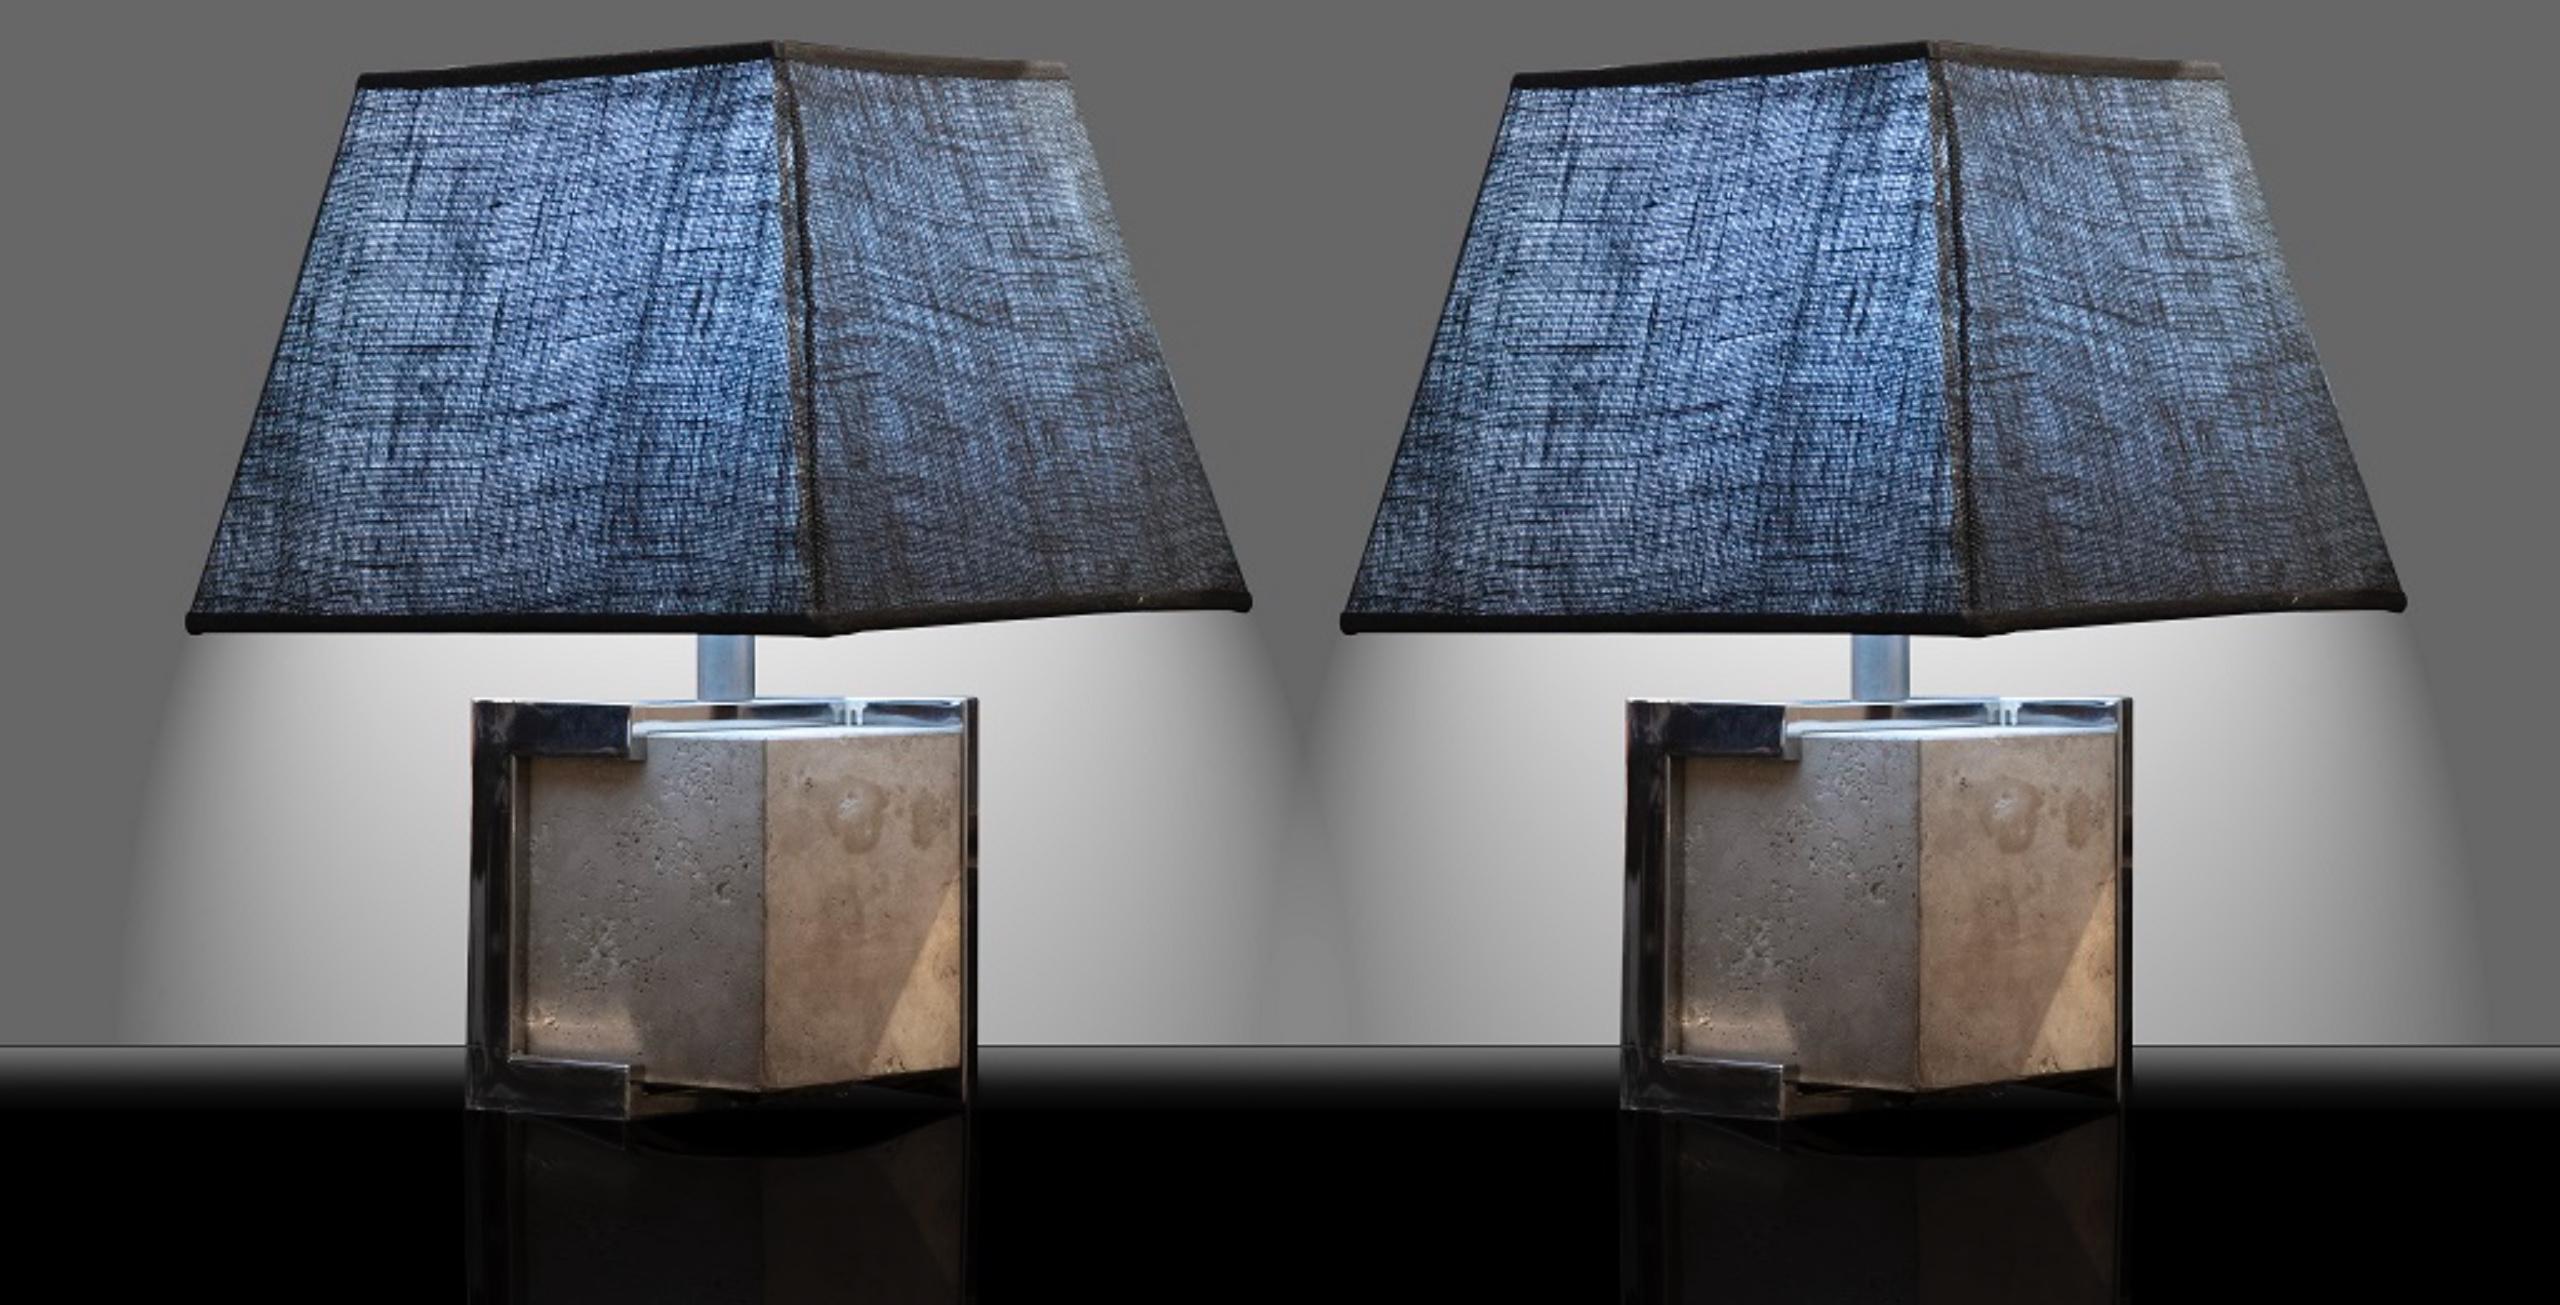 Vintage pair of table lamps is an original design work realized in the 1970s by Willy Rizzo (Naples, 1928 - Paris, 2013).

Made in Italy.

Steel and marble.

Total dimensions: 55 x 20 x 20 cm.

Very good conditions. 

Willy Rizzo (Naples,